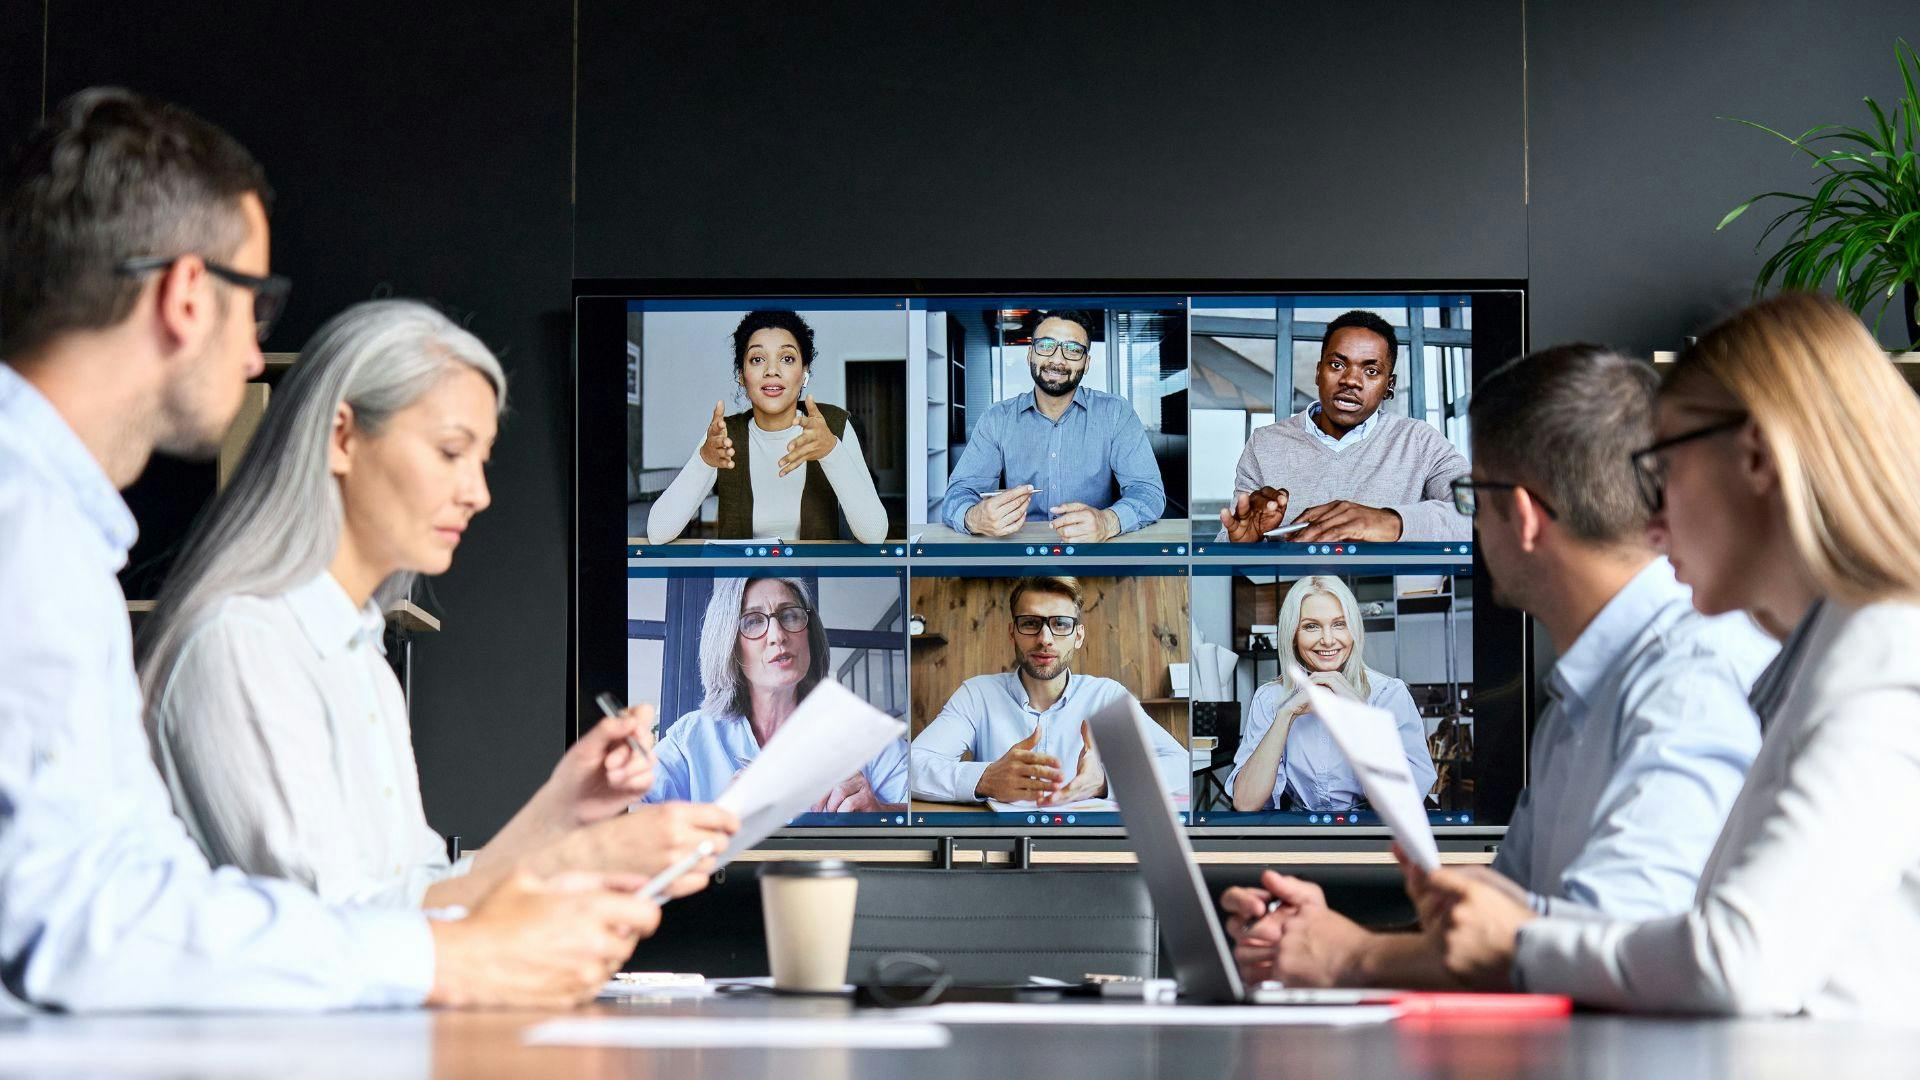 A diverse group of professionals engaged in a video conference, collaborating in a conference room.